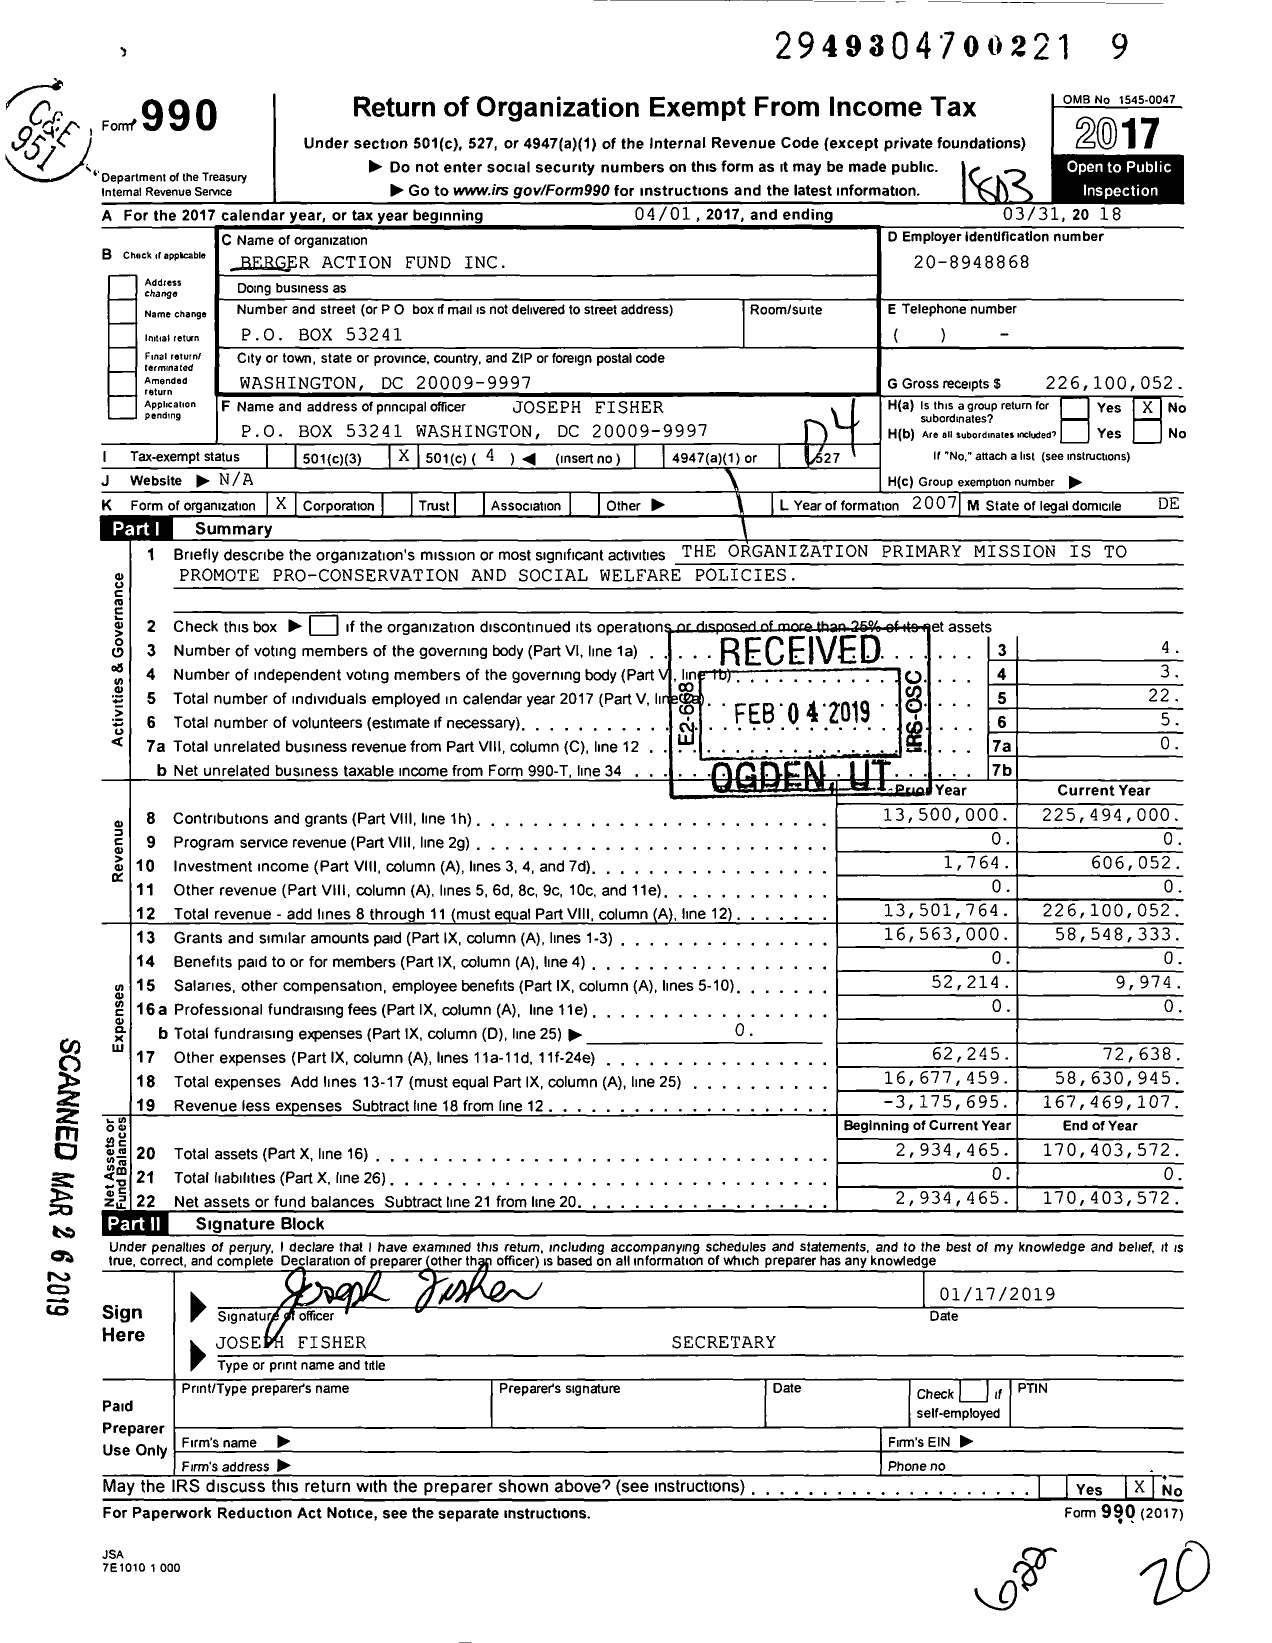 Image of first page of 2017 Form 990O for Berger Action Fund